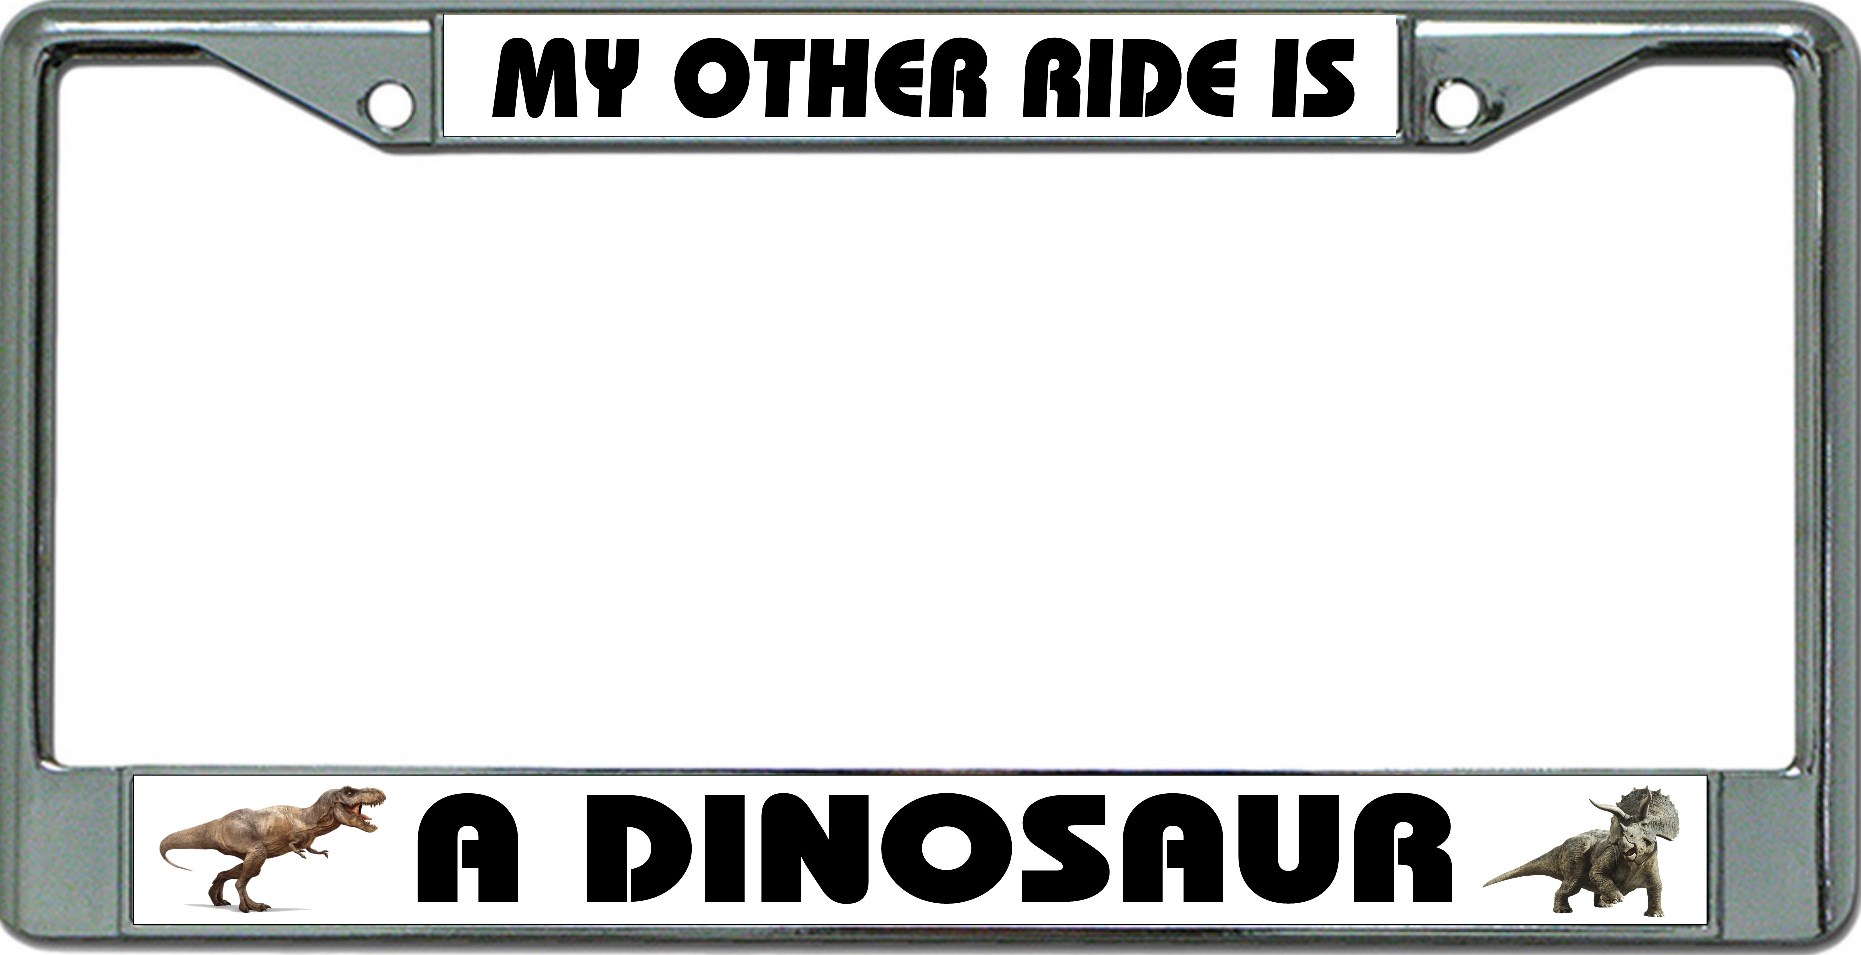 My Other Ride Is A Dinosaur Steel Metal License Plate Frame 